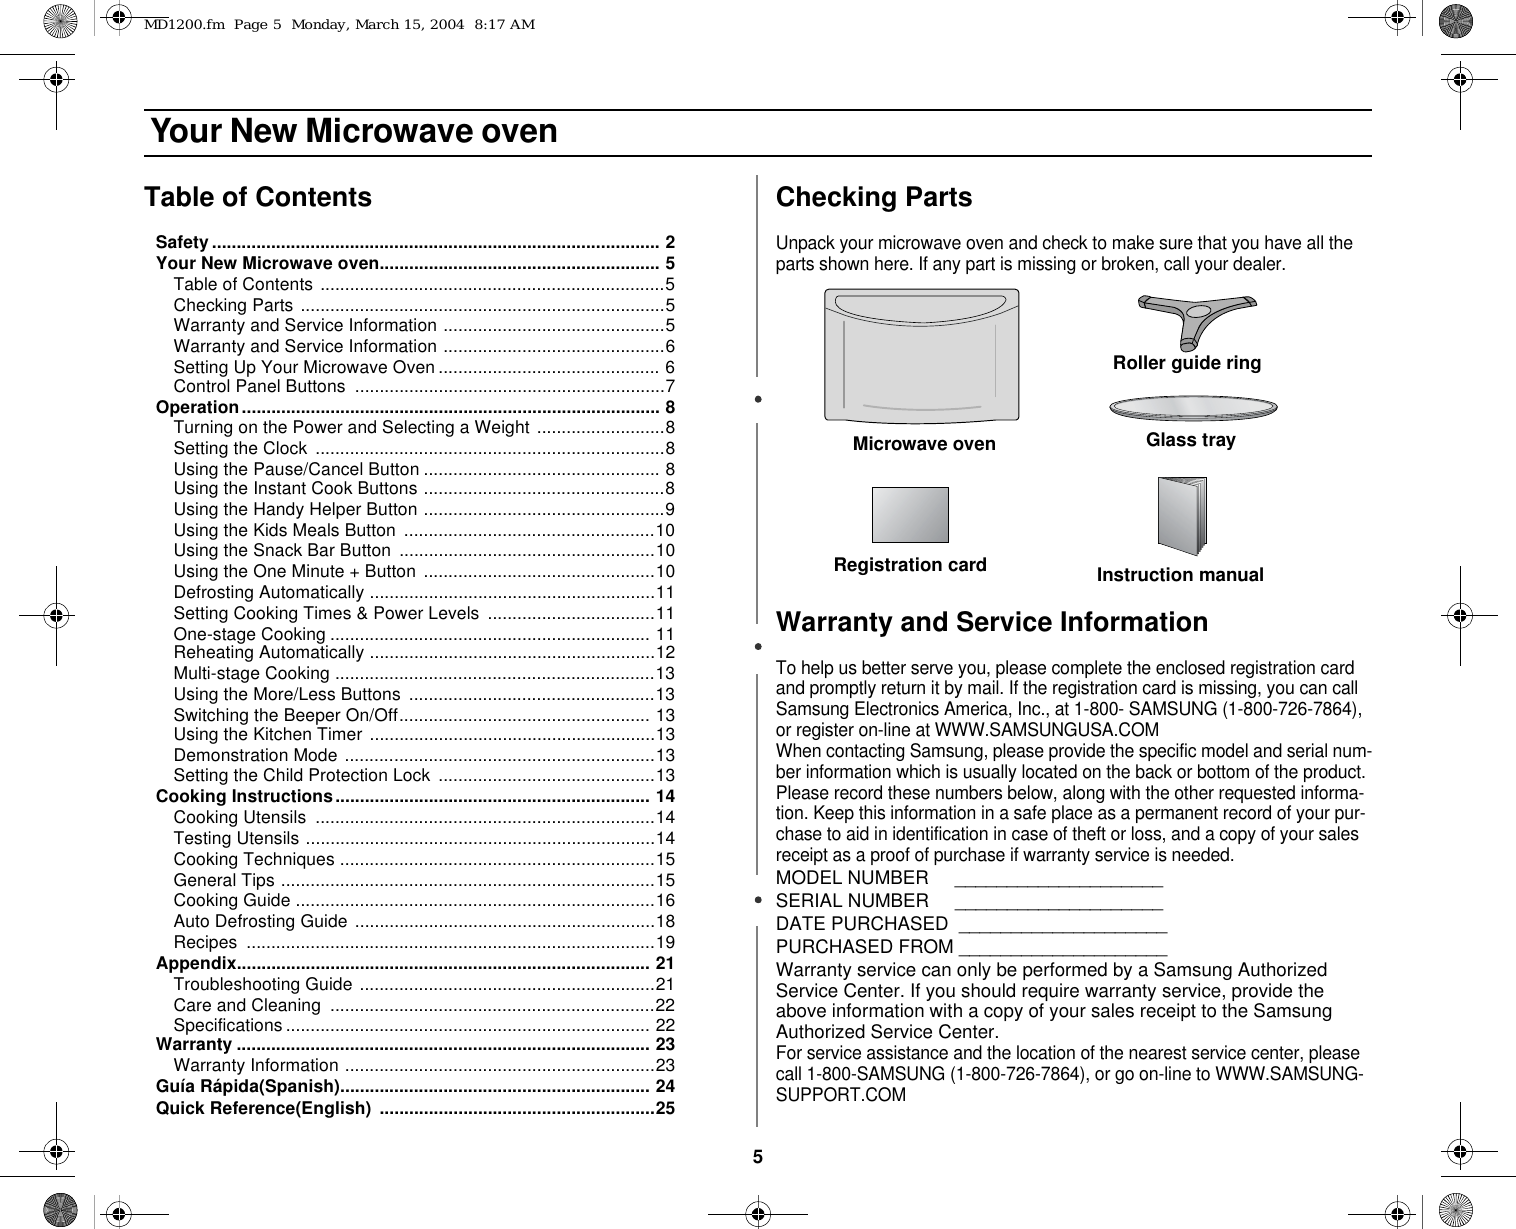 5 Your New Microwave ovenTable of ContentsSafety........................................................................................... 2Your New Microwave oven......................................................... 5Table of Contents ......................................................................5Checking Parts ..........................................................................5Warranty and Service Information .............................................5Warranty and Service Information .............................................6Setting Up Your Microwave Oven ............................................. 6Control Panel Buttons  ...............................................................7Operation..................................................................................... 8Turning on the Power and Selecting a Weight ..........................8Setting the Clock  .......................................................................8Using the Pause/Cancel Button ................................................ 8Using the Instant Cook Buttons .................................................8Using the Handy Helper Button .................................................9Using the Kids Meals Button ...................................................10Using the Snack Bar Button  ....................................................10Using the One Minute + Button  ...............................................10Defrosting Automatically ..........................................................11Setting Cooking Times &amp; Power Levels ..................................11One-stage Cooking ................................................................. 11Reheating Automatically ..........................................................12Multi-stage Cooking .................................................................13Using the More/Less Buttons ..................................................13Switching the Beeper On/Off................................................... 13Using the Kitchen Timer ..........................................................13Demonstration Mode ...............................................................13Setting the Child Protection Lock  ............................................13Cooking Instructions................................................................ 14Cooking Utensils  .....................................................................14Testing Utensils .......................................................................14Cooking Techniques ................................................................15General Tips ............................................................................15Cooking Guide .........................................................................16Auto Defrosting Guide .............................................................18Recipes ...................................................................................19Appendix.................................................................................... 21Troubleshooting Guide ............................................................21Care and Cleaning  ..................................................................22Specifications .......................................................................... 22Warranty .................................................................................... 23Warranty Information ...............................................................23Guía Rápida(Spanish)............................................................... 24Quick Reference(English)  ........................................................25Checking PartsUnpack your microwave oven and check to make sure that you have all the parts shown here. If any part is missing or broken, call your dealer.Warranty and Service InformationTo help us better serve you, please complete the enclosed registration card and promptly return it by mail. If the registration card is missing, you can call Samsung Electronics America, Inc., at 1-800- SAMSUNG (1-800-726-7864), or register on-line at WWW.SAMSUNGUSA.COMWhen contacting Samsung, please provide the specific model and serial num-ber information which is usually located on the back or bottom of the product. Please record these numbers below, along with the other requested informa-tion. Keep this information in a safe place as a permanent record of your pur-chase to aid in identification in case of theft or loss, and a copy of your sales receipt as a proof of purchase if warranty service is needed.MODEL NUMBER     ____________________SERIAL NUMBER     ____________________DATE PURCHASED  ____________________PURCHASED FROM ____________________Warranty service can only be performed by a Samsung Authorized Service Center. If you should require warranty service, provide the above information with a copy of your sales receipt to the Samsung Authorized Service Center. For service assistance and the location of the nearest service center, please call 1-800-SAMSUNG (1-800-726-7864), or go on-line to WWW.SAMSUNG-SUPPORT.COMMicrowave oven Glass trayRoller guide ringInstruction manualRegistration cardMD1200.fm  Page 5  Monday, March 15, 2004  8:17 AM